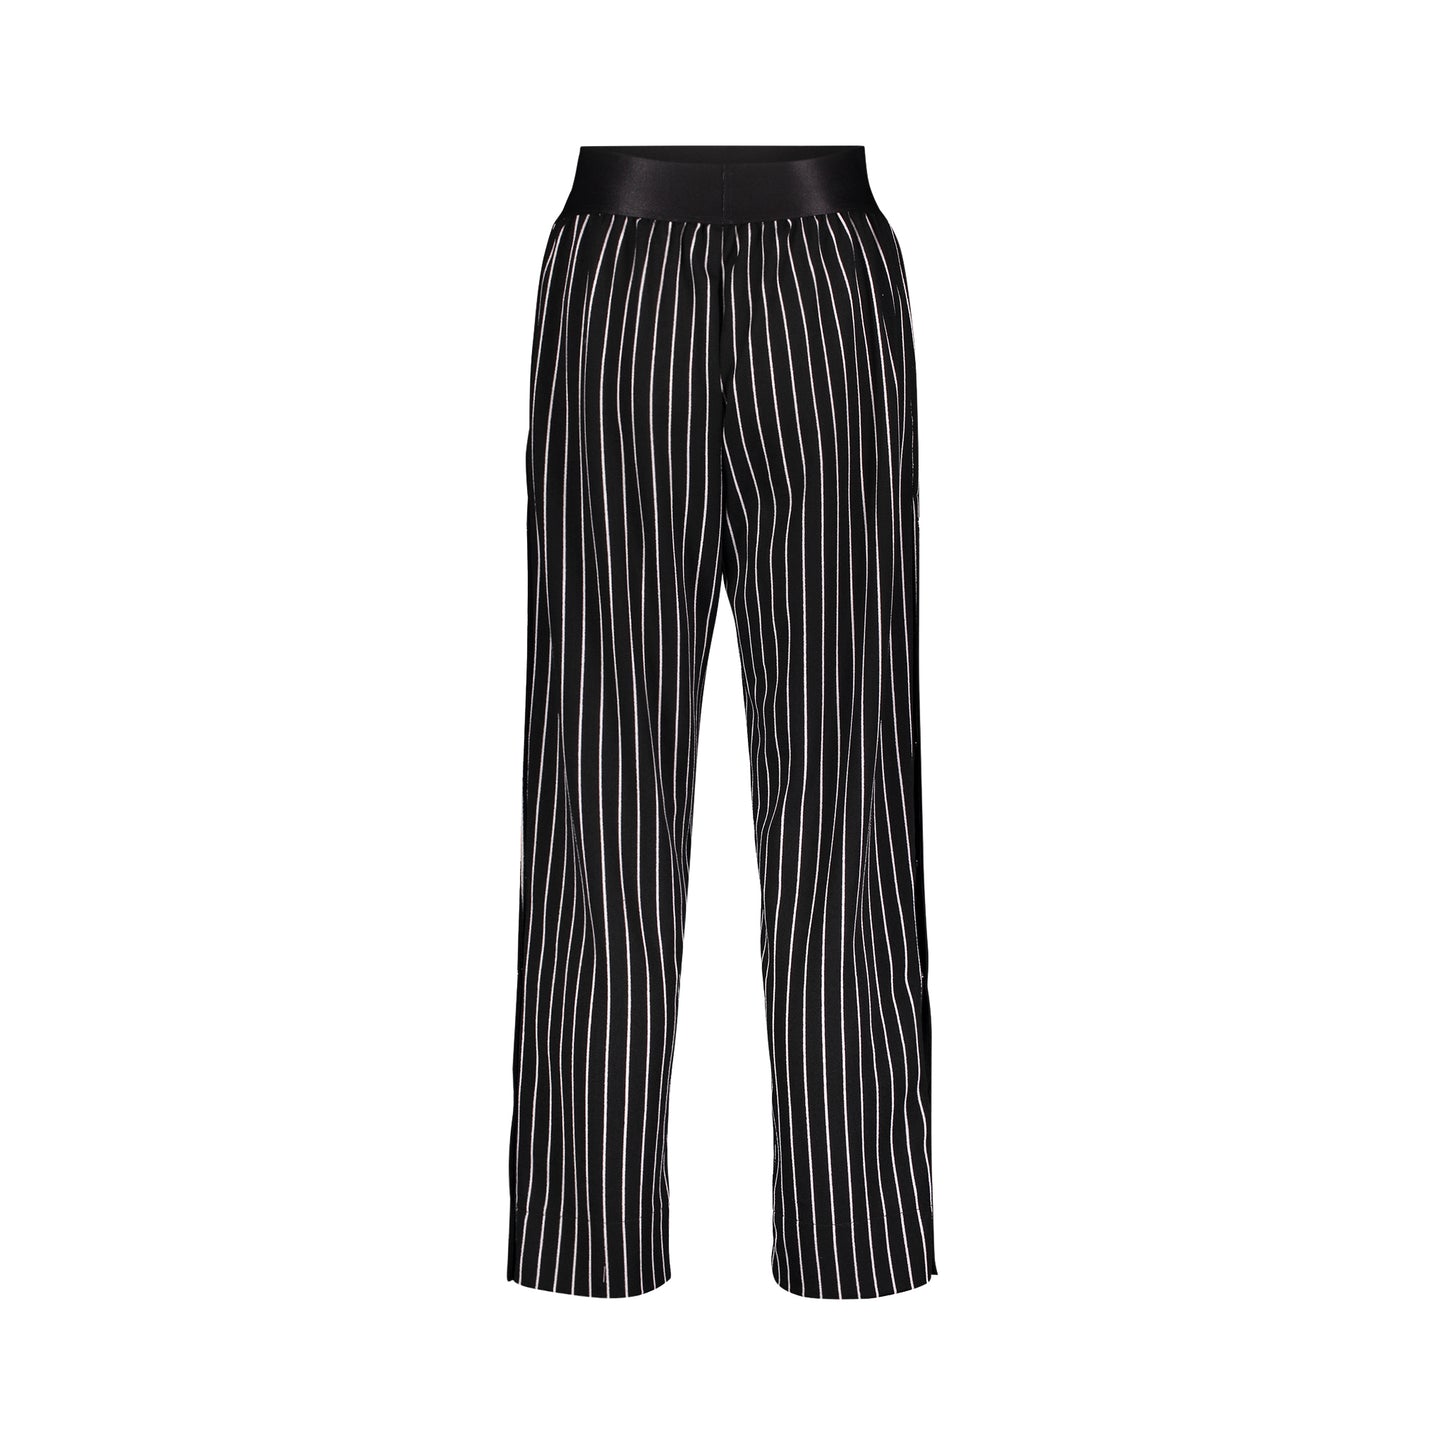 Racer Track Pants freeshipping - LLESSUR NYC